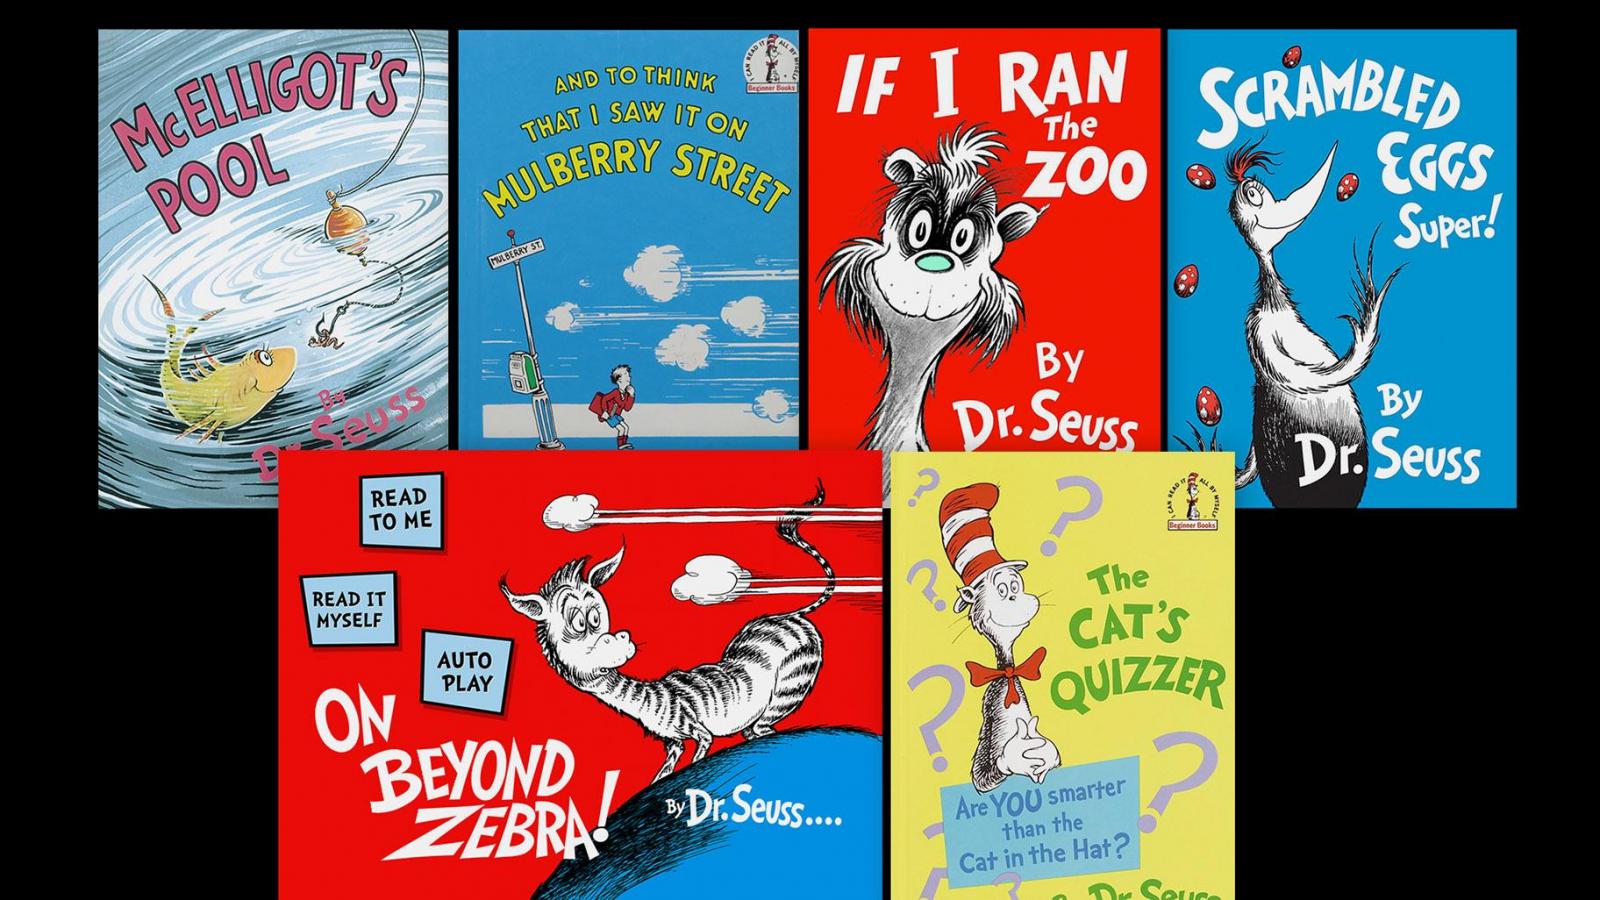 If You Can Pass This Random Knowledge Quiz, You Know Too Much Drseussbookcollage File